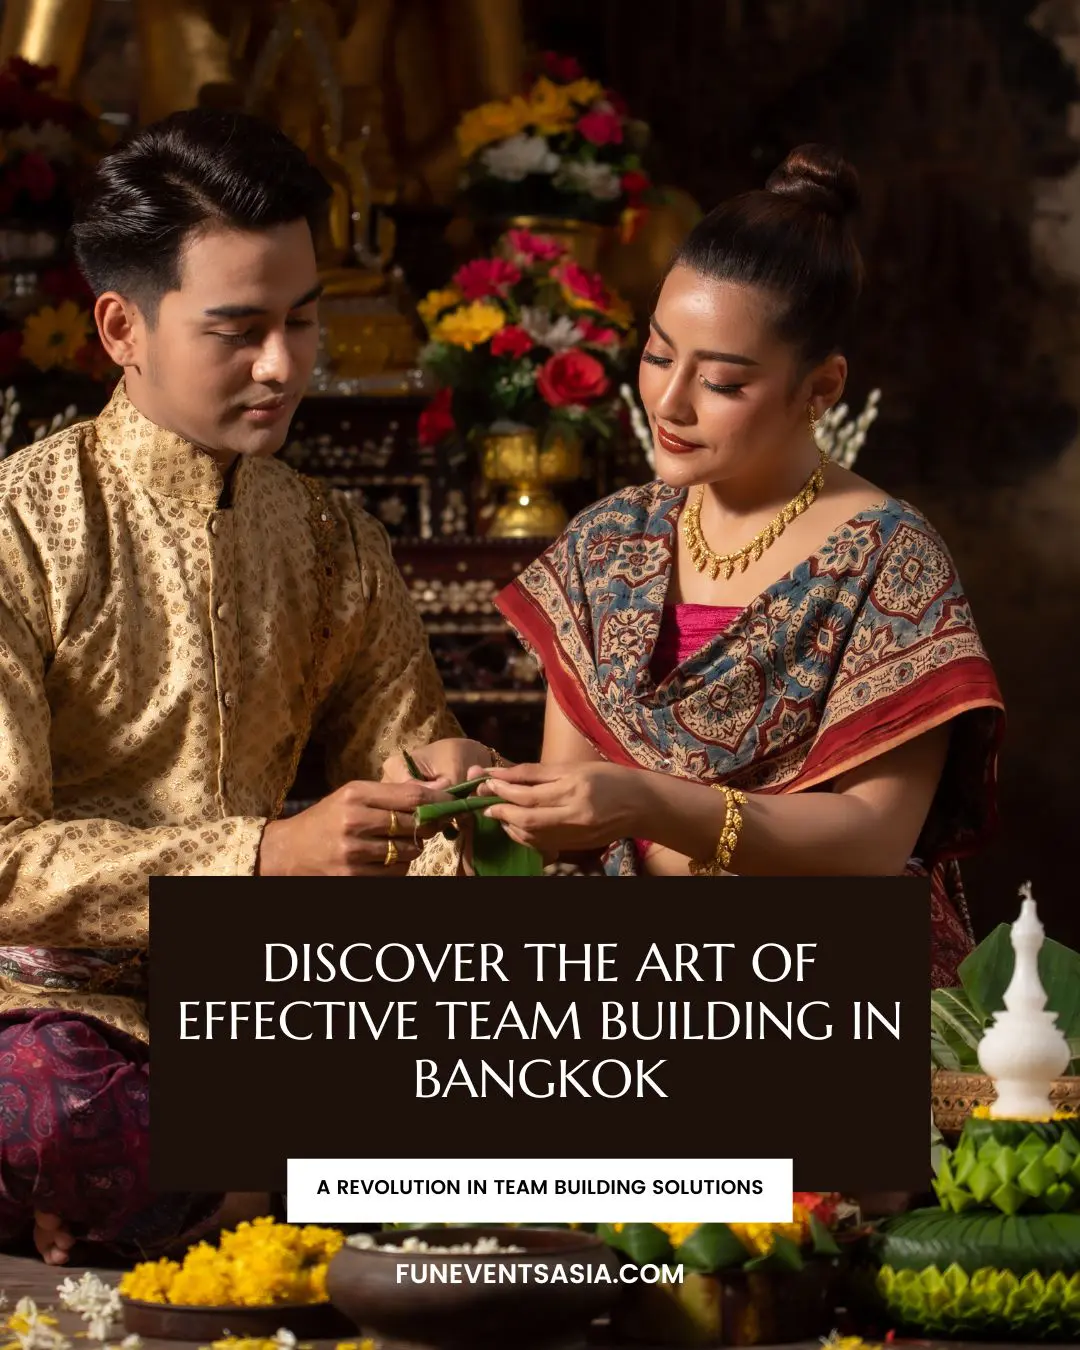 Discover the Art of Effective Team Building in Bangkok